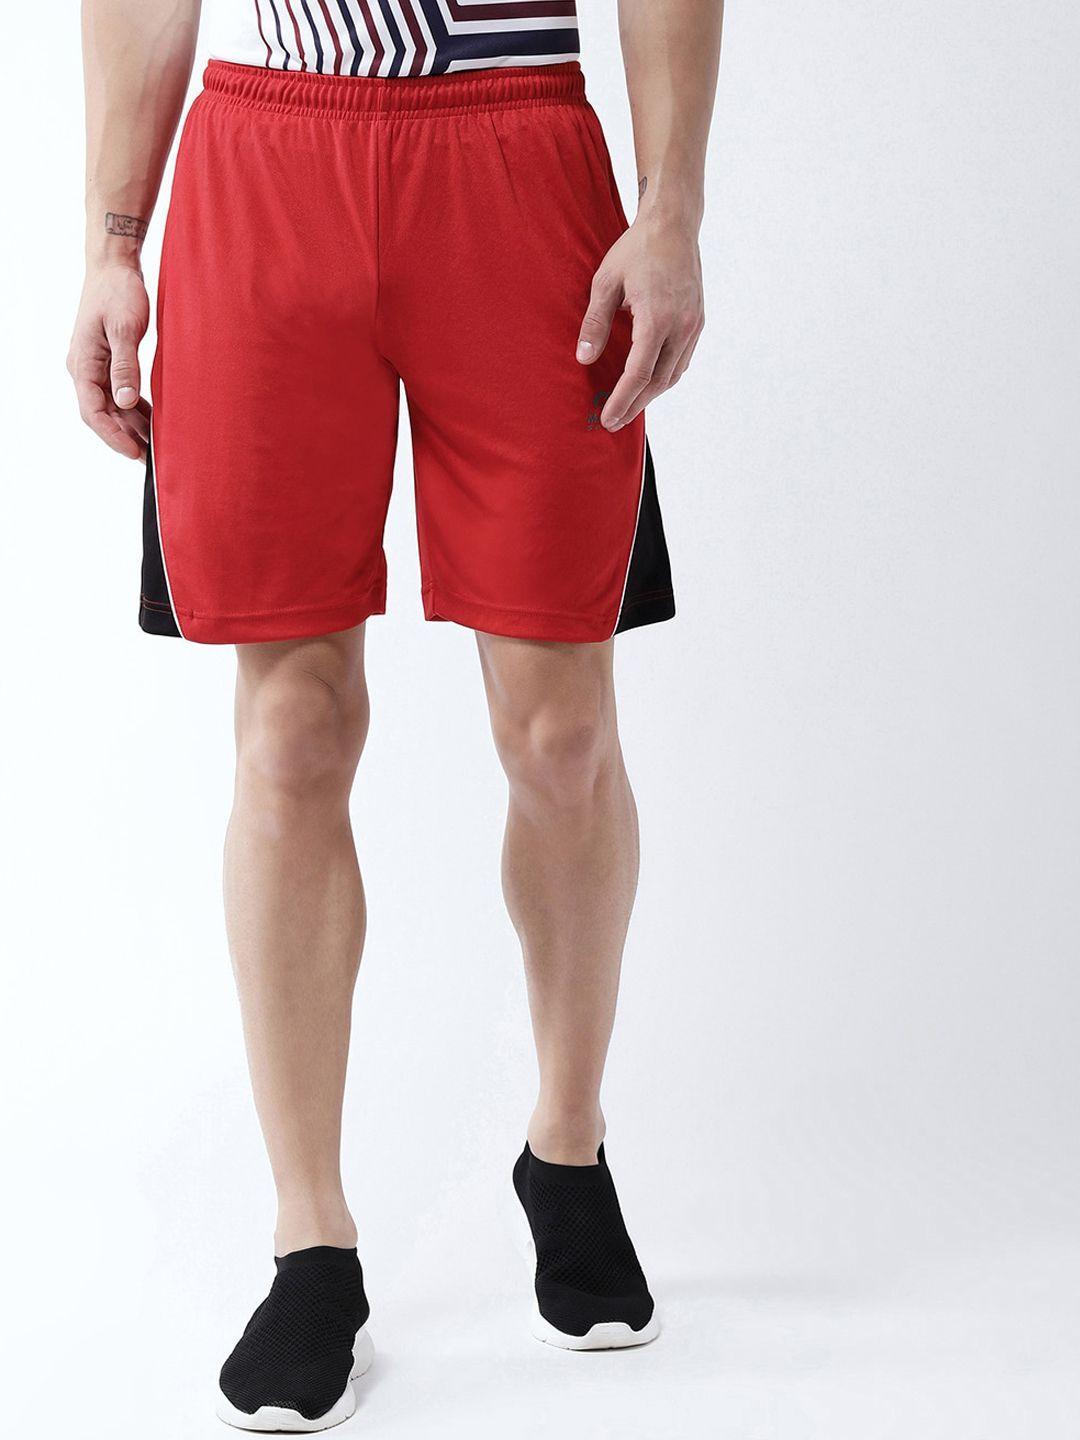 masch sports men red training or gym sports shorts